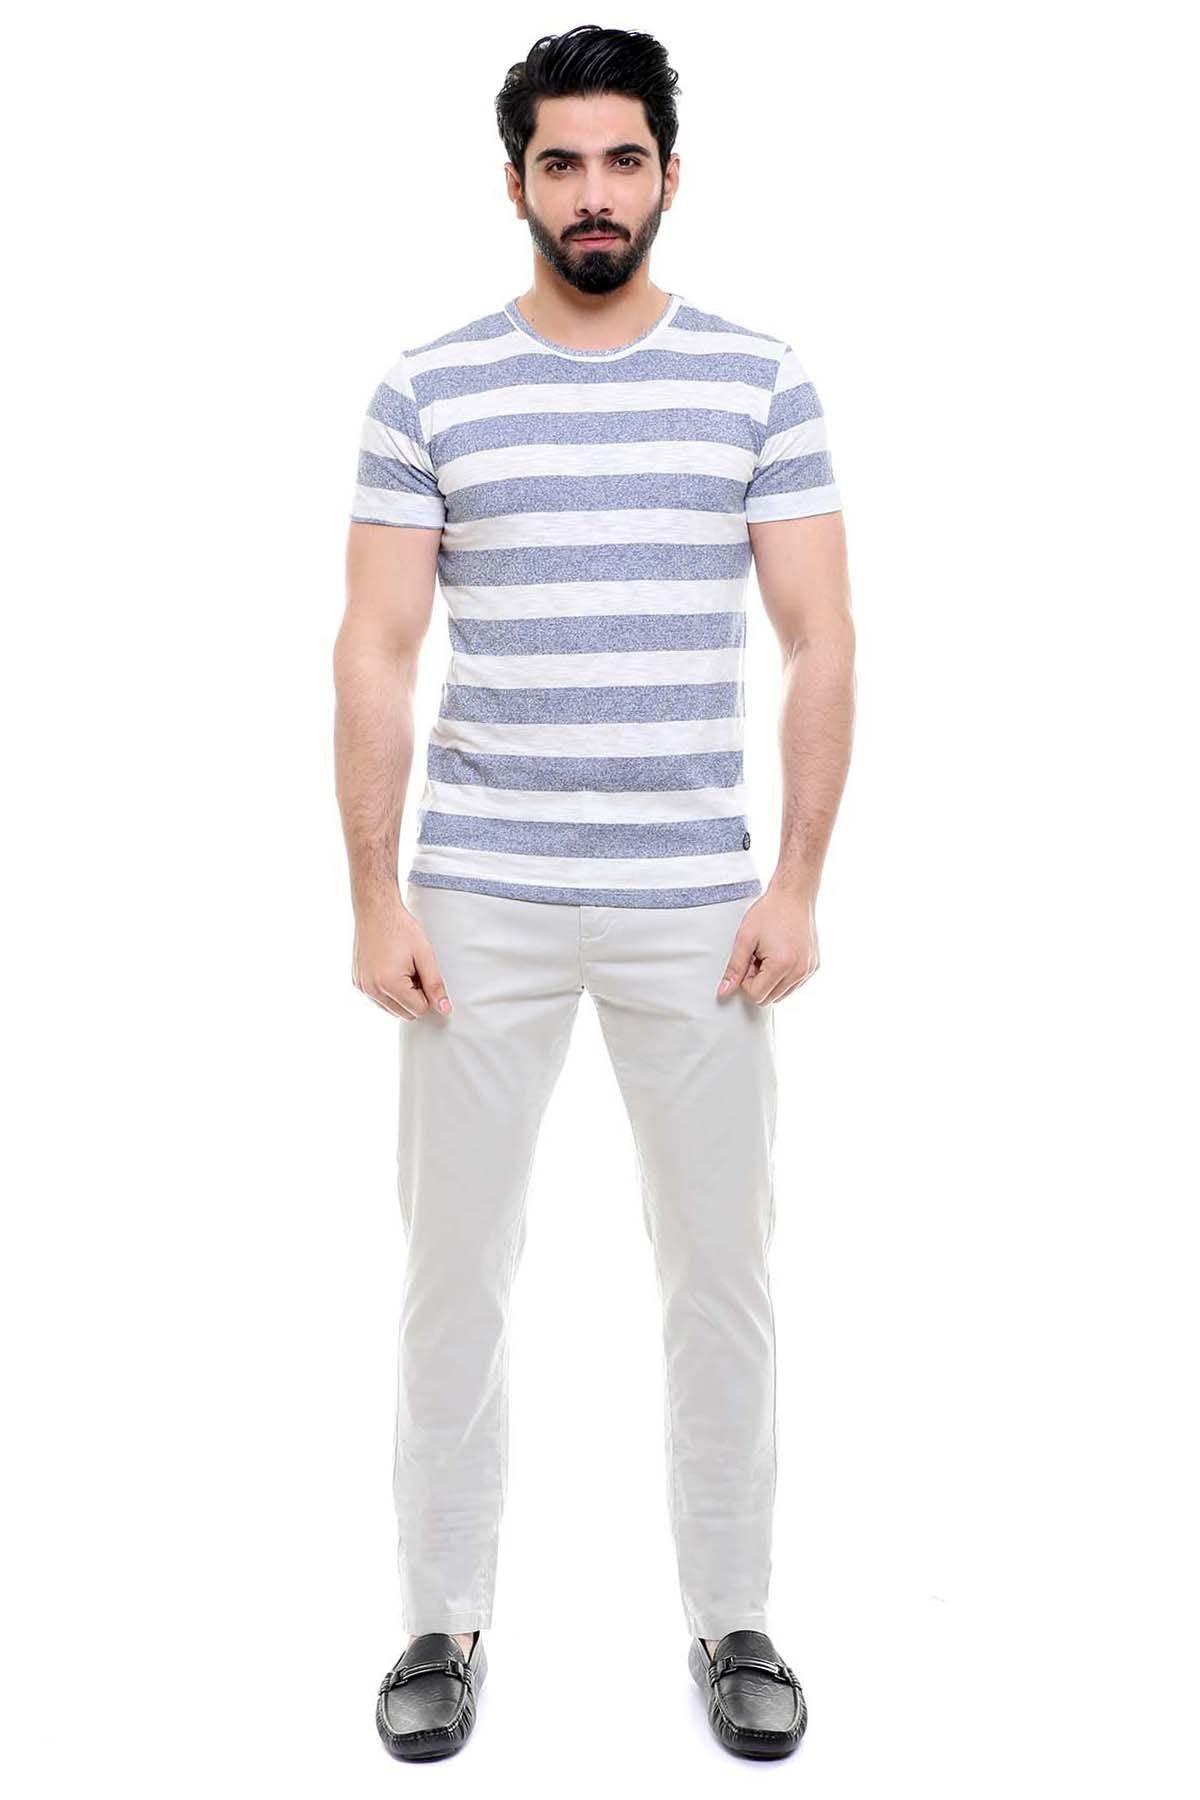 T SHIRT ROUND NECK BLUE WHITE LINE at Charcoal Clothing